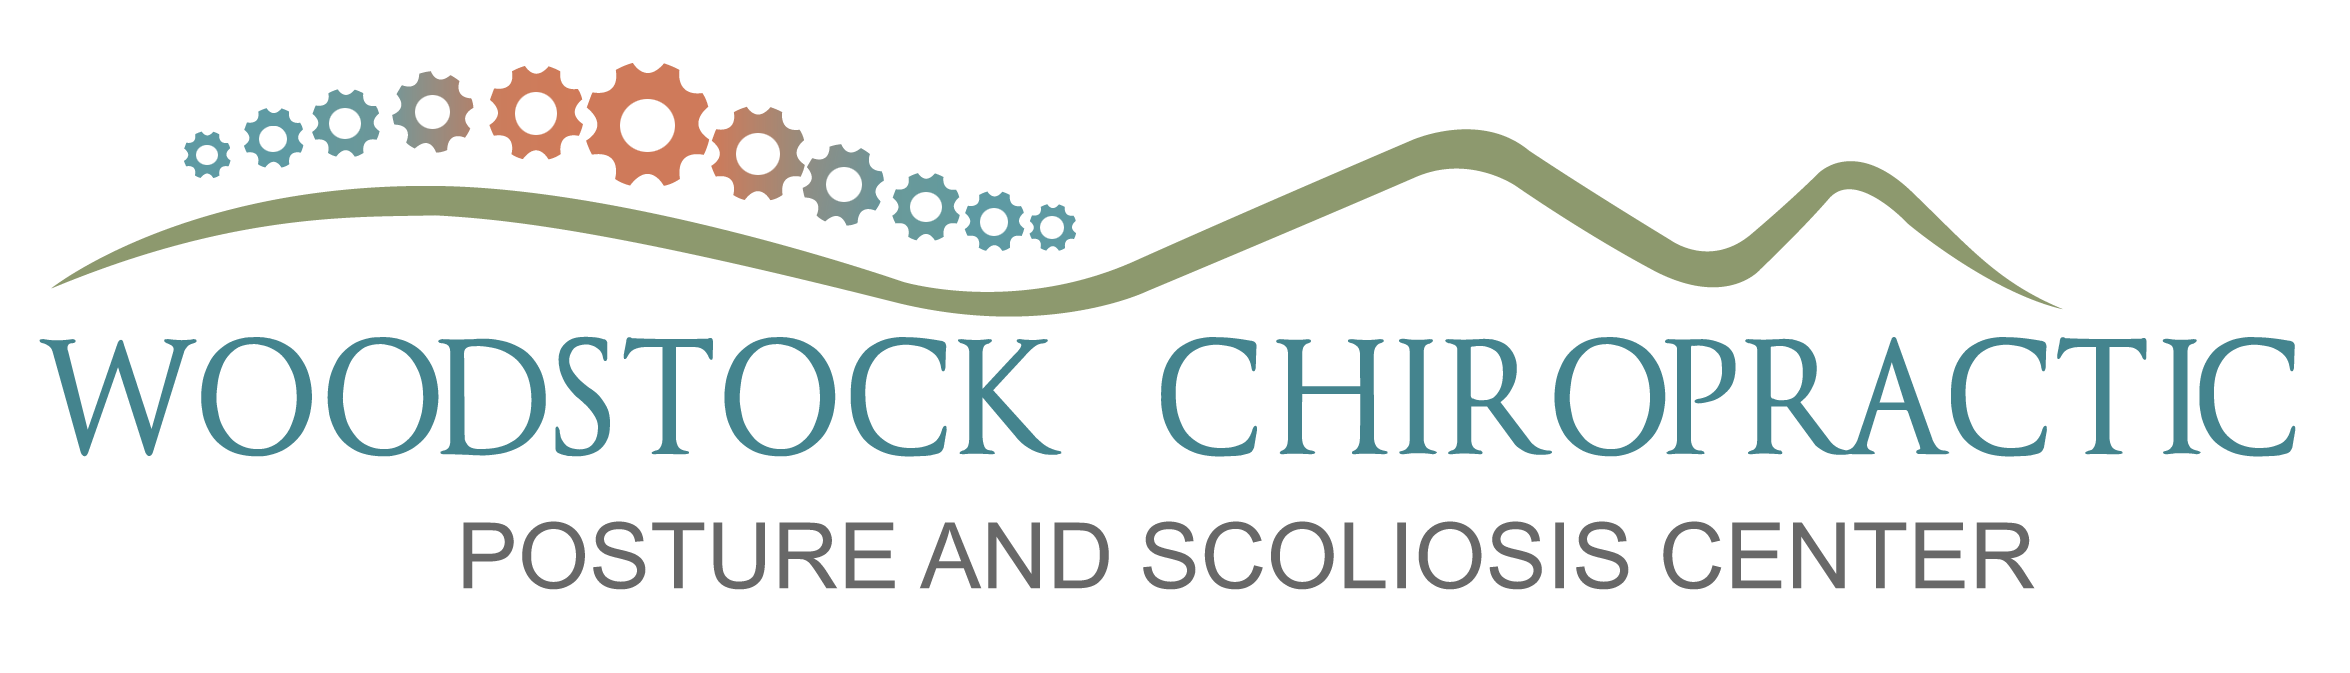 Woodstock Chiropractic, Posture and Scoliosis Center